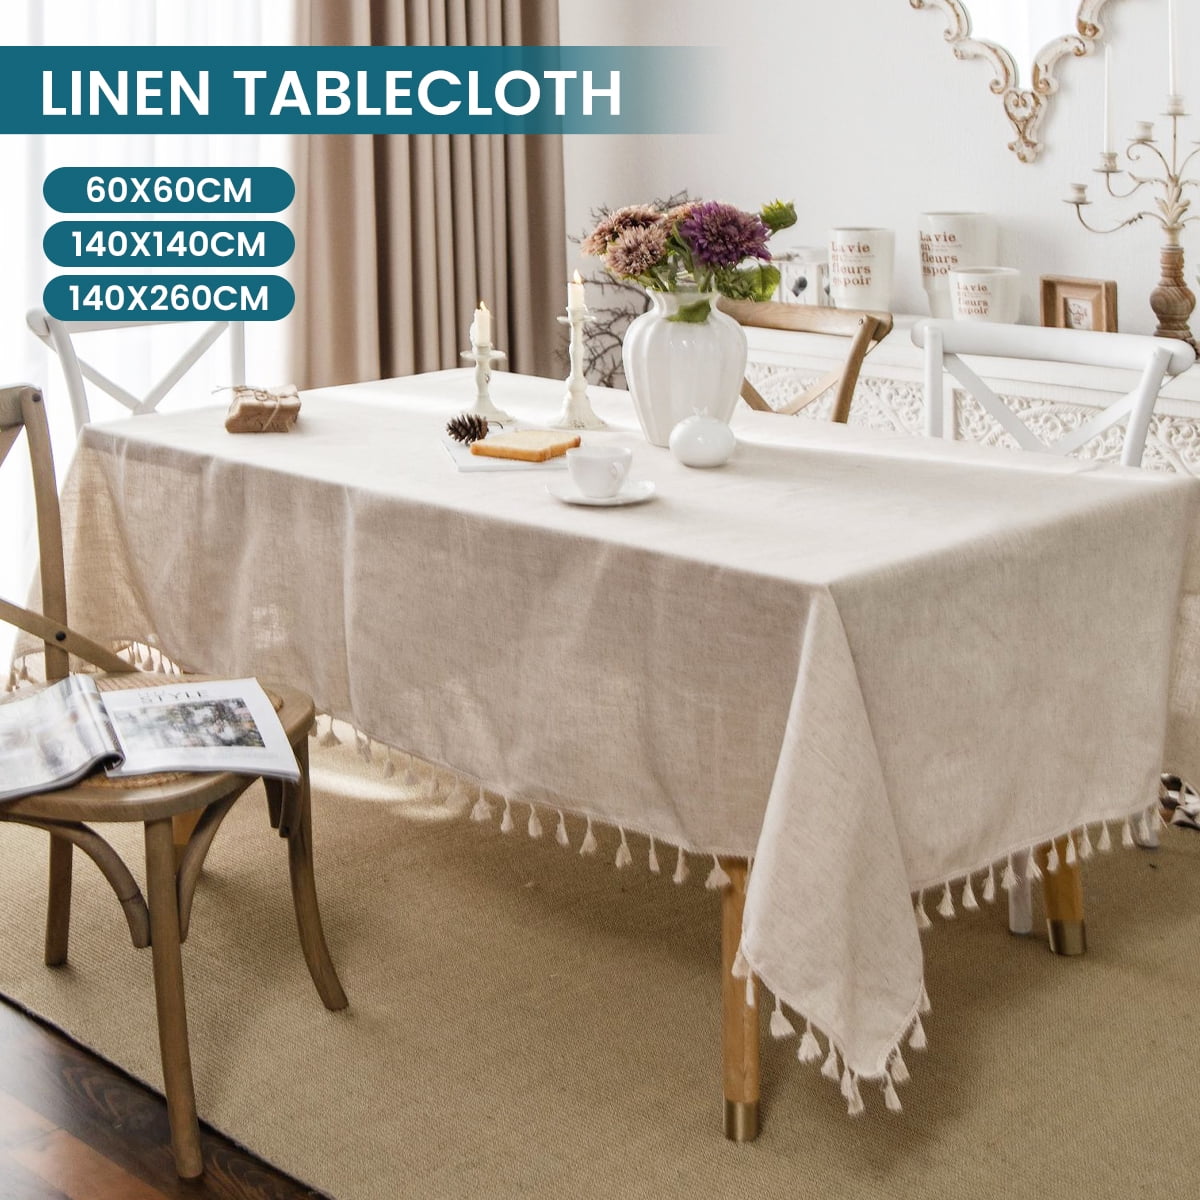 Hotbest Linen Tablecloth With Tassel